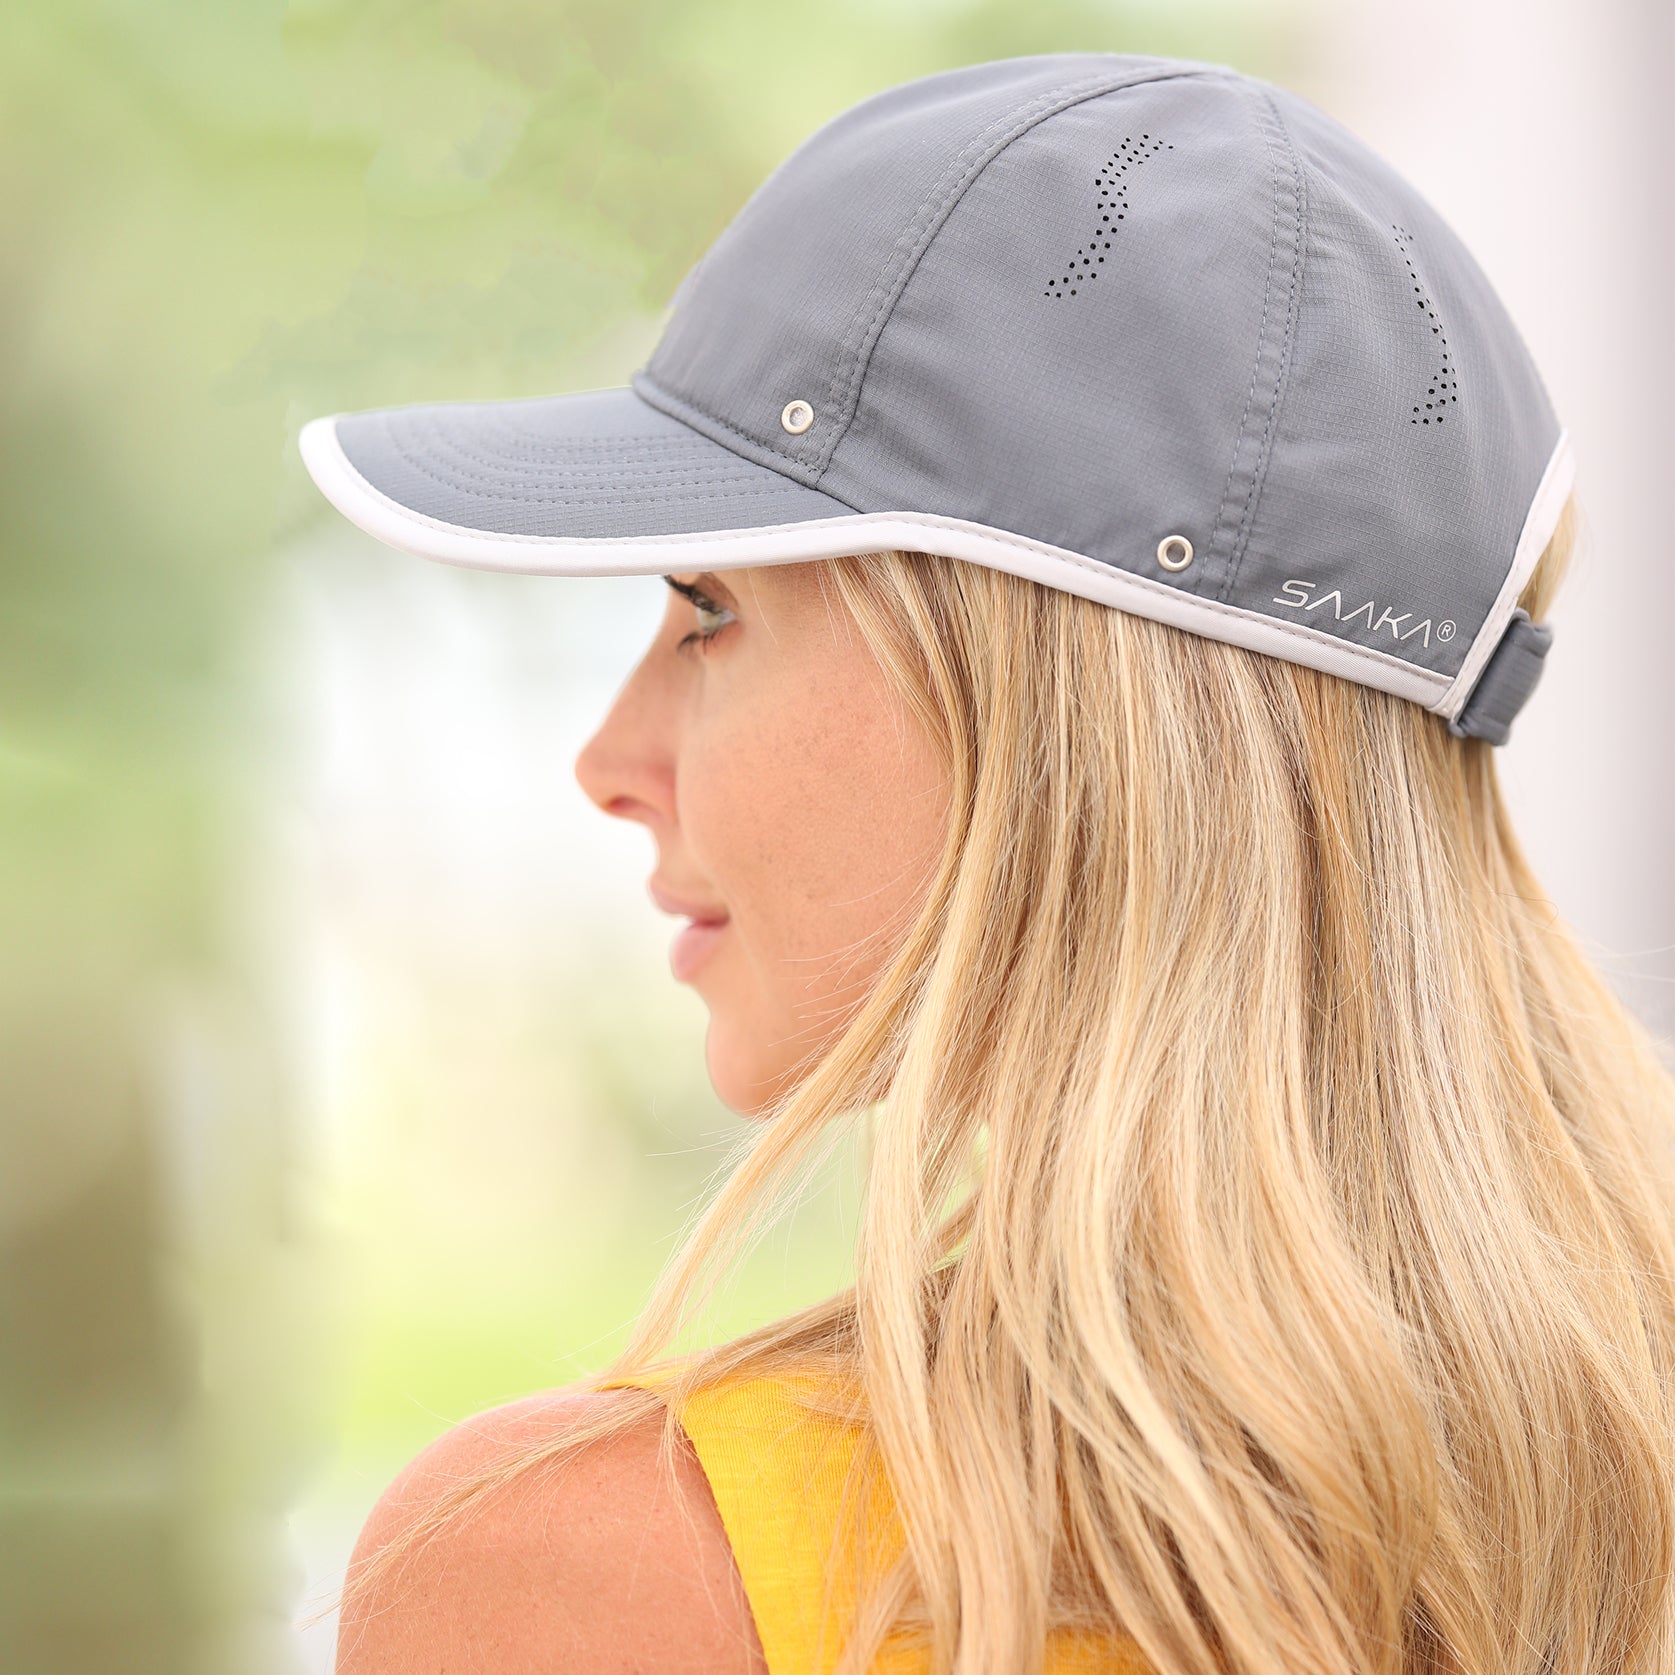 Sports Hats | Hats for Gym Tennis, & Running, Golf